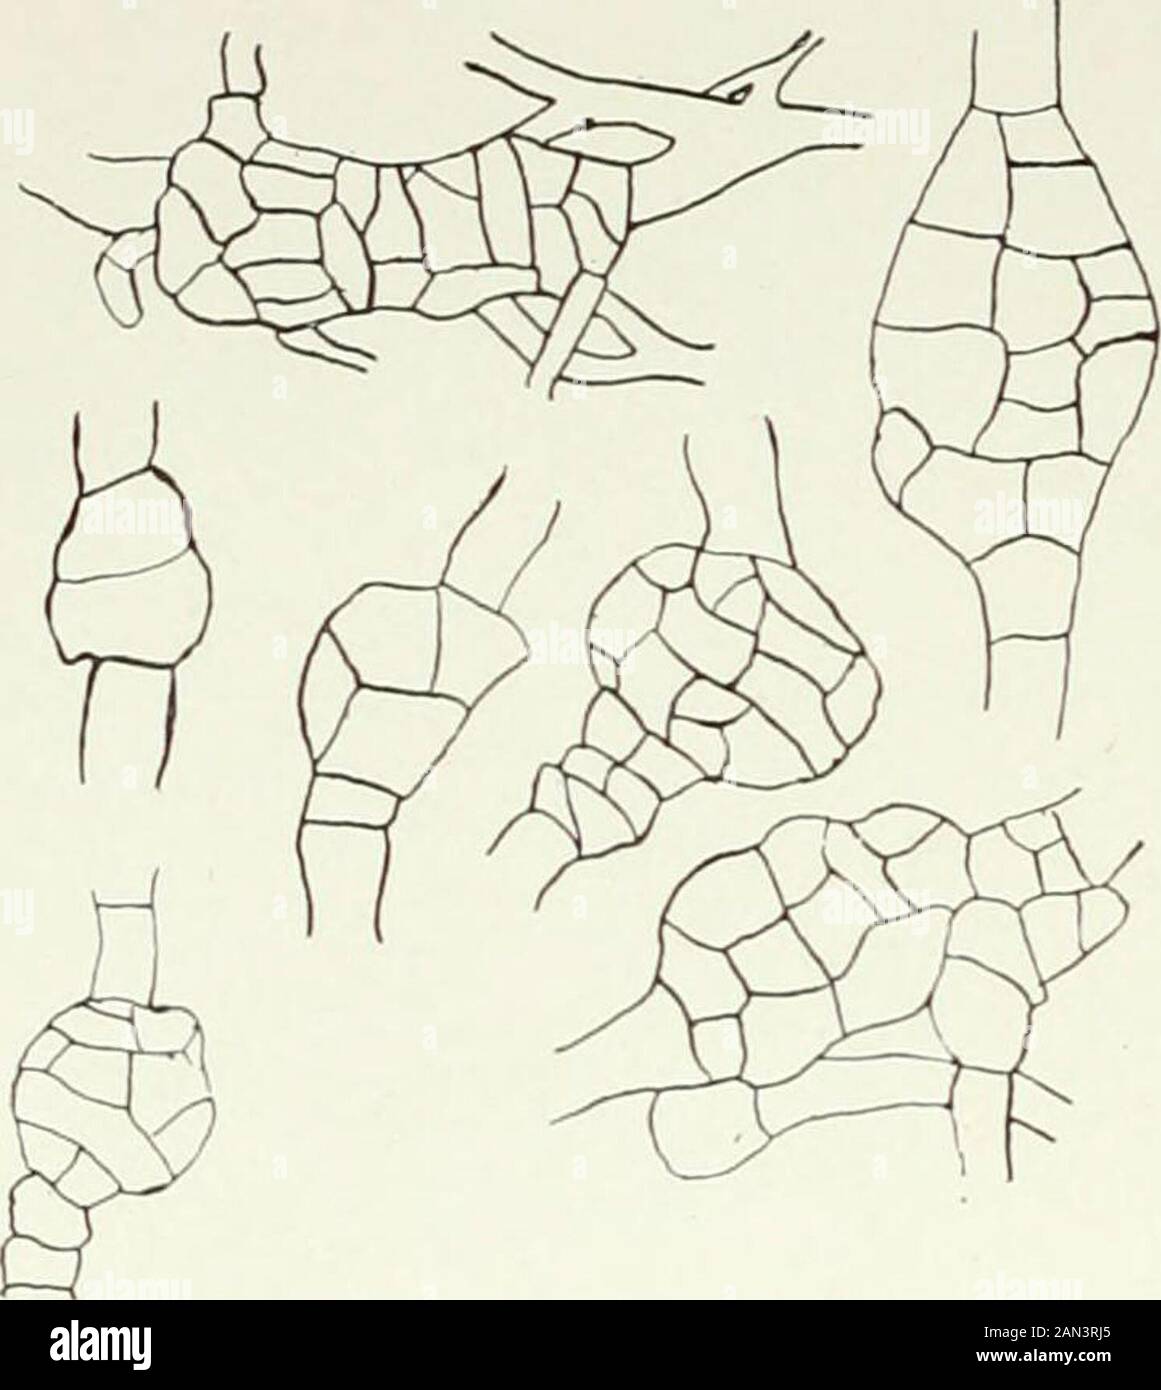 Fungi, Ascomycetes, Ustilaginales, Uredinales . nea cretea and the Ascoboli, where the coiled and septate archicarp isoften still functional. A very common initial organ in forms with embedded perithecia is theshort filament of cells sometimes known as Woronins hypha (fig. 103). Thecells are large and contain well-marked nuclei and lie in a nest of small-celled vegetative mycelium. Woronins hypha has been found among theHypocreales mNectria and among the Sphaeriales in Xylaria an&Hypoxylon; it remains to be shown whether it still functions. It may haveoriginated from the simple archi-carps of Stock Photo